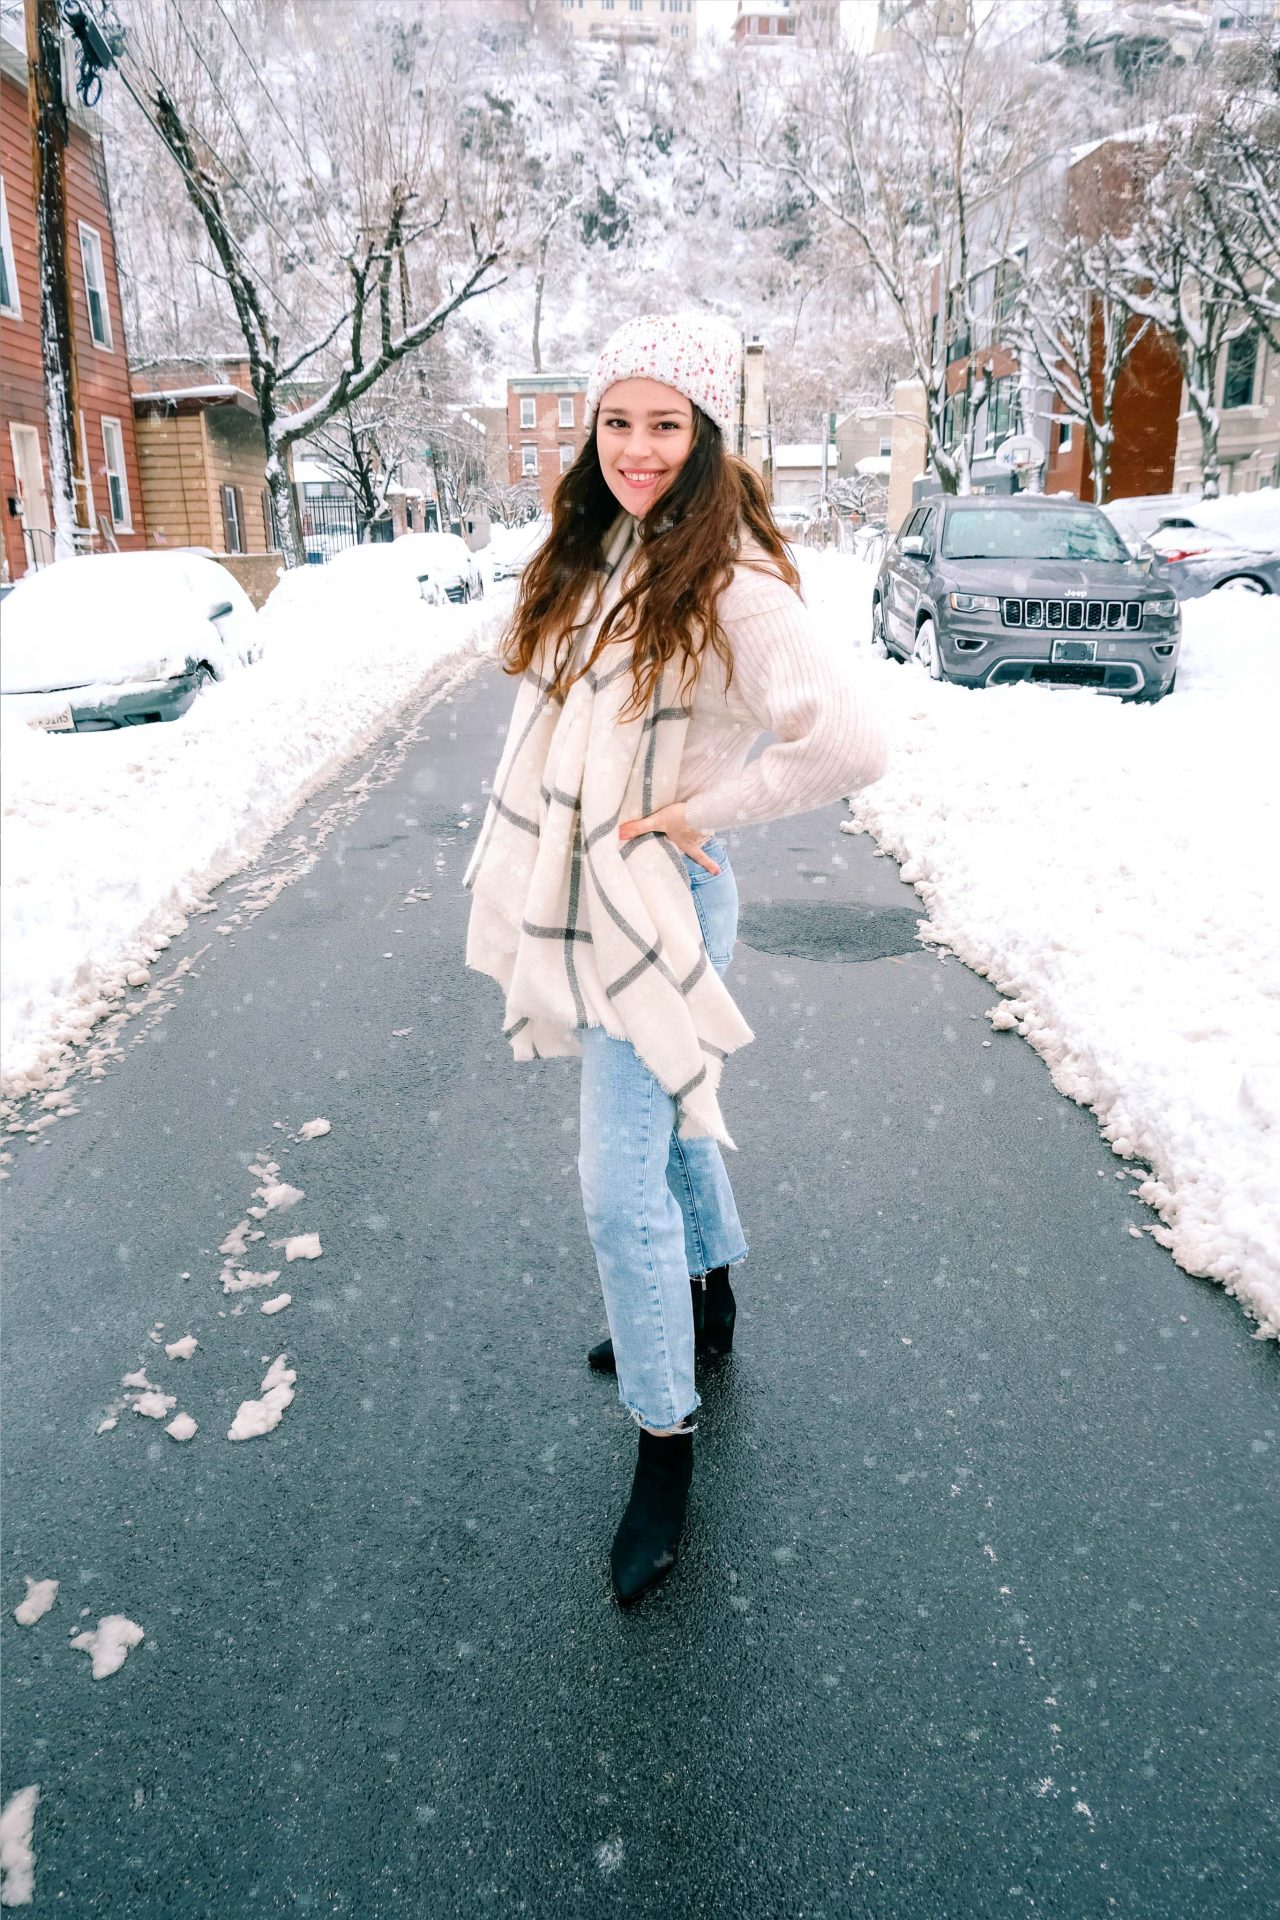 Embracing the Winter Snow Storm in the City, Fun Photos - Simply Taralynn